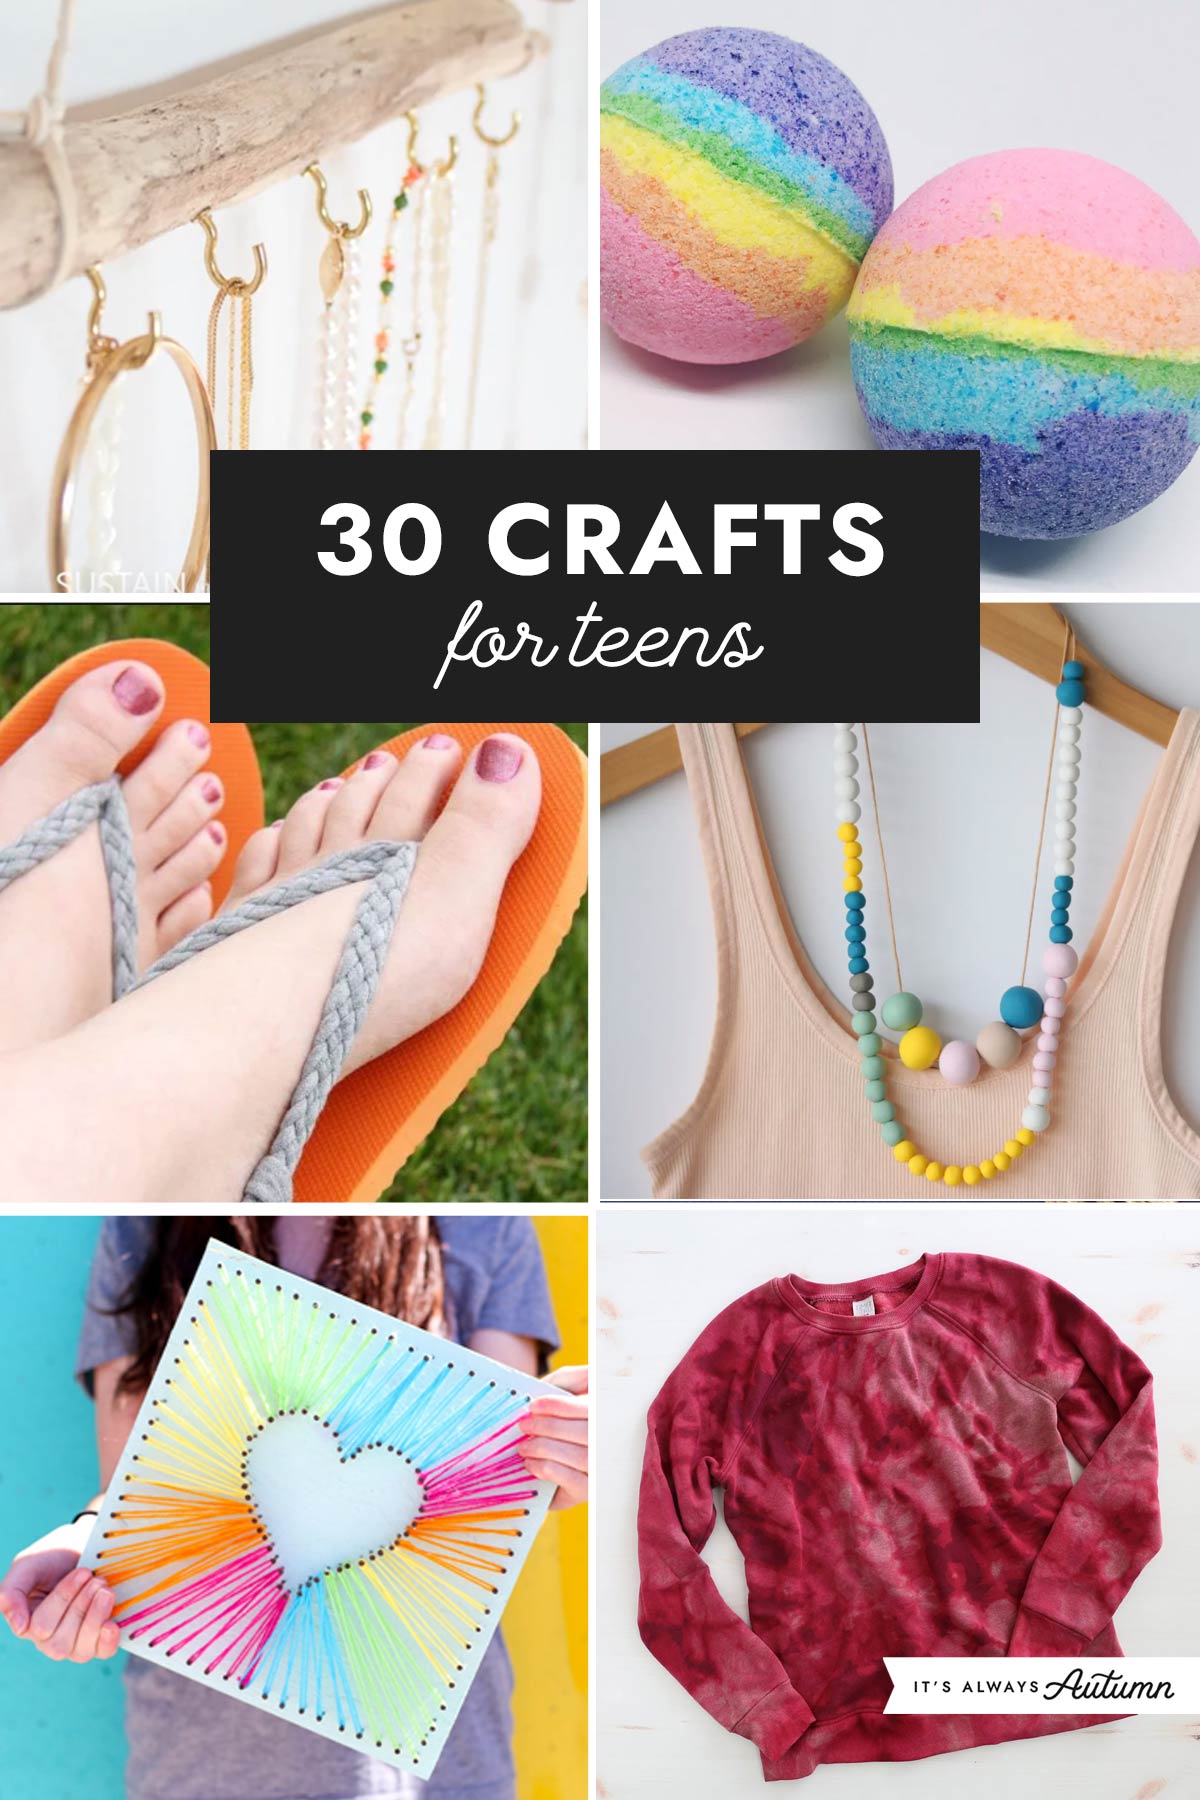 16 Awesome Paper Crafts For Teens – Sustain My Craft Habit